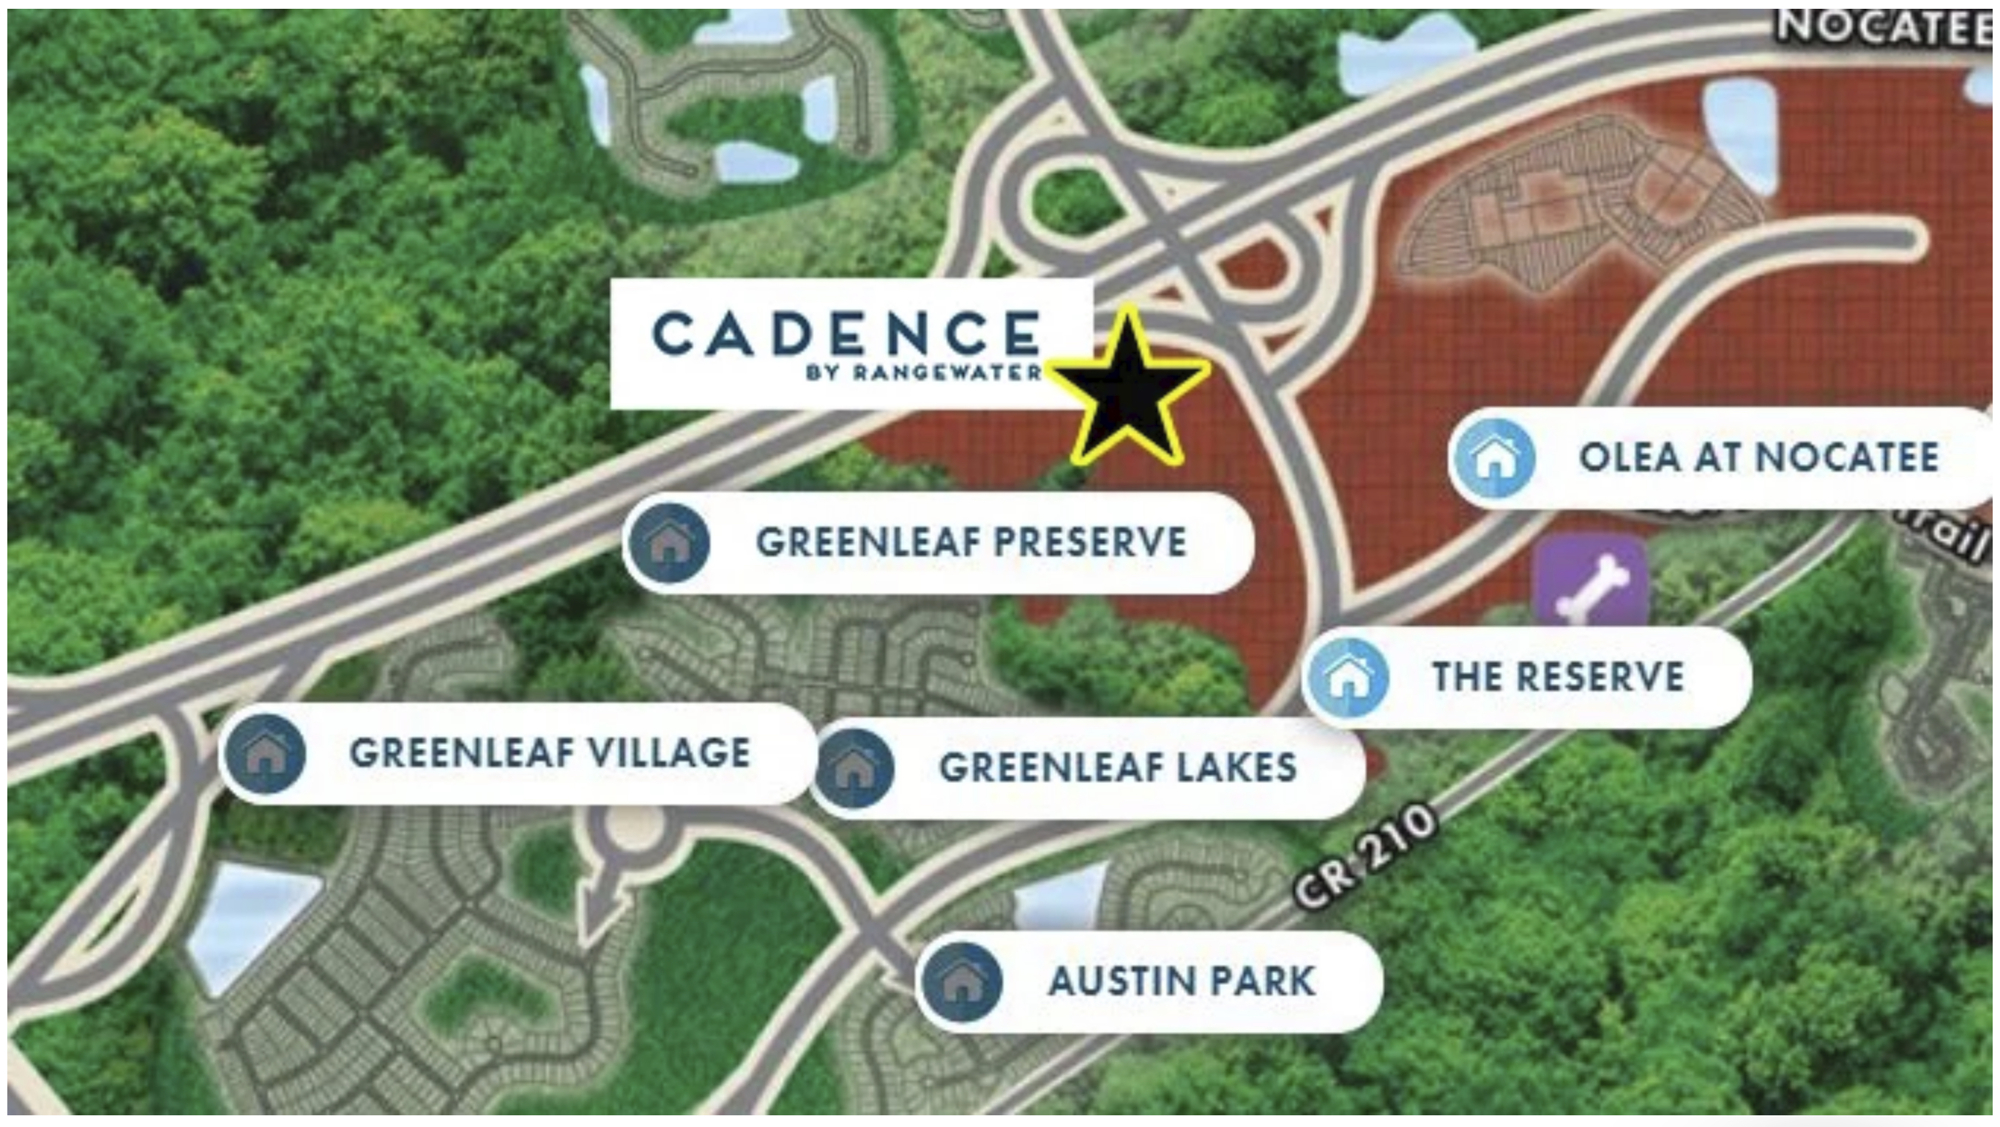 The Cadence by RangeWater is planned on 14 acres on the Duval County side of Nocatee. The master-planned community of Nocatee primarily is in northern St. Johns County.